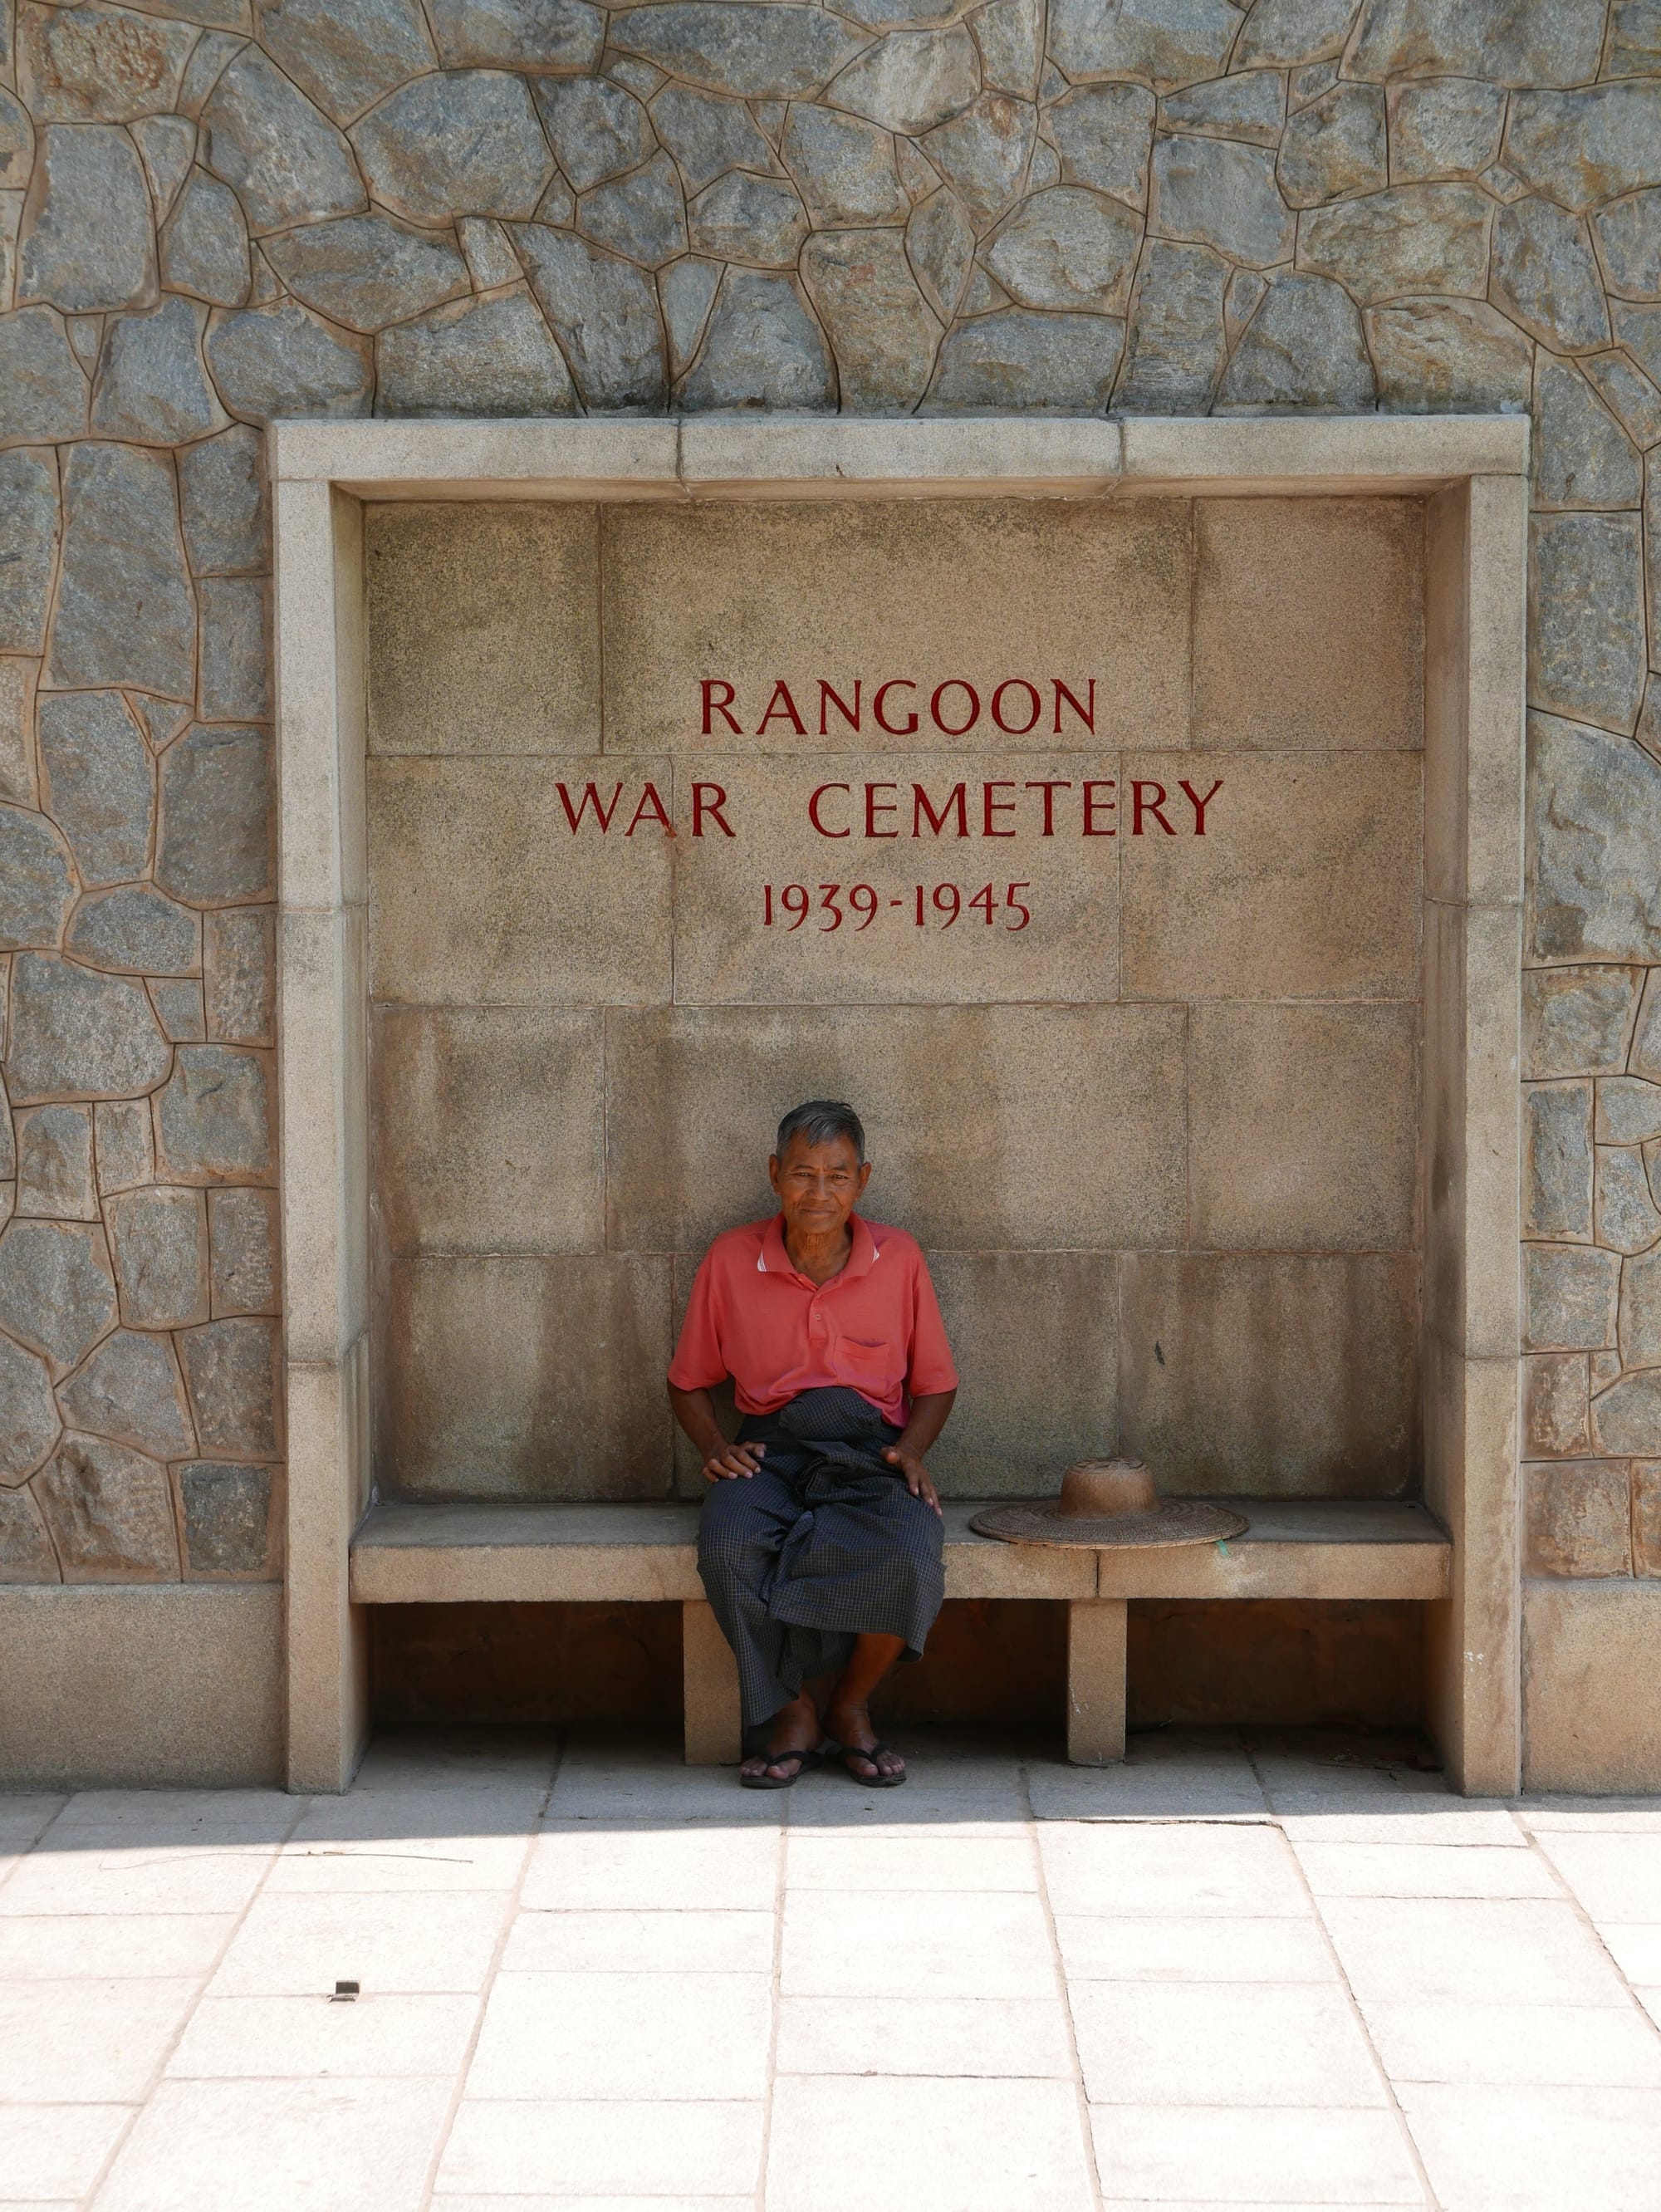 Photo by Author — one of the attendants at the Rangoon War Cemetery